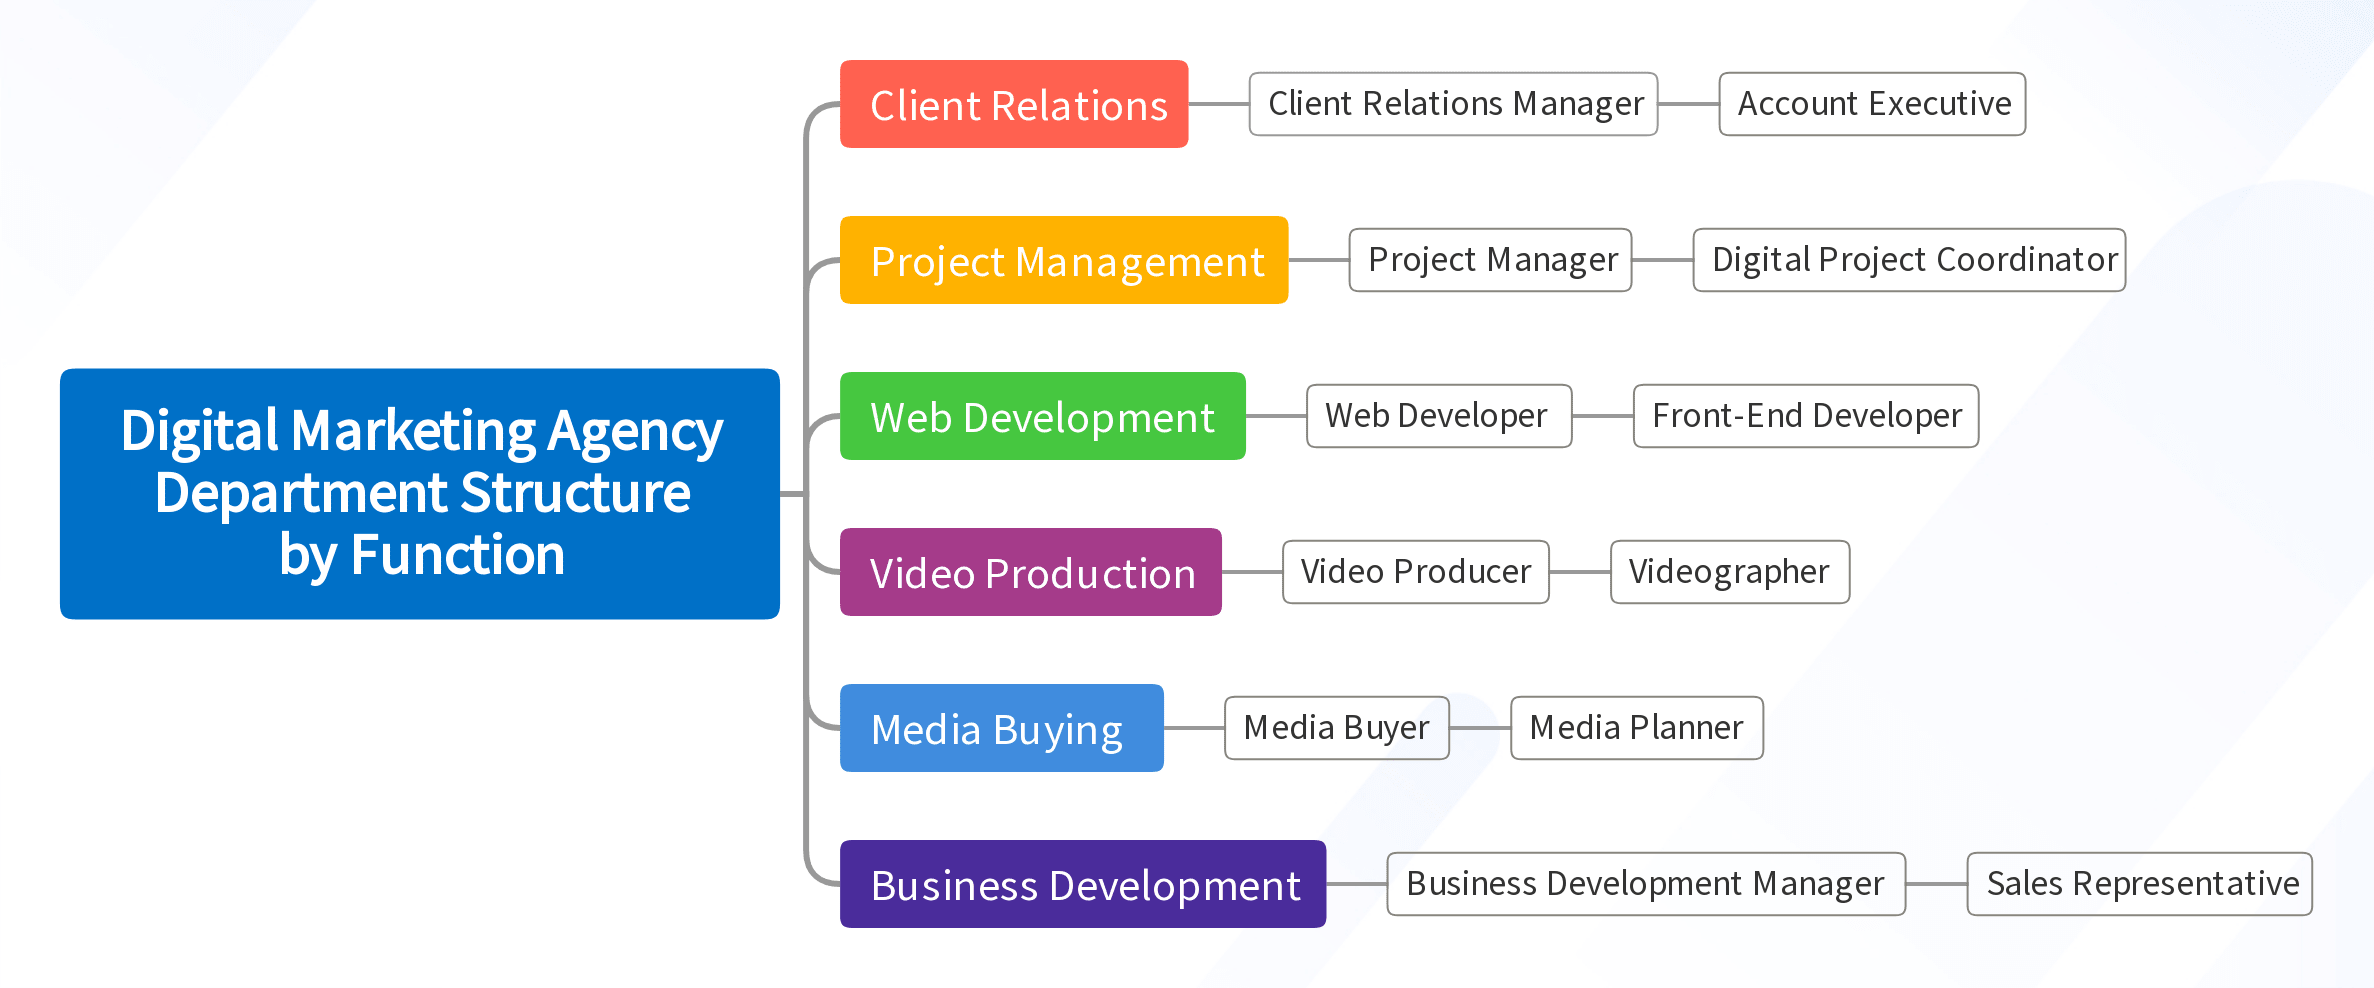 Digital Marketing Agency Department Structure by Function